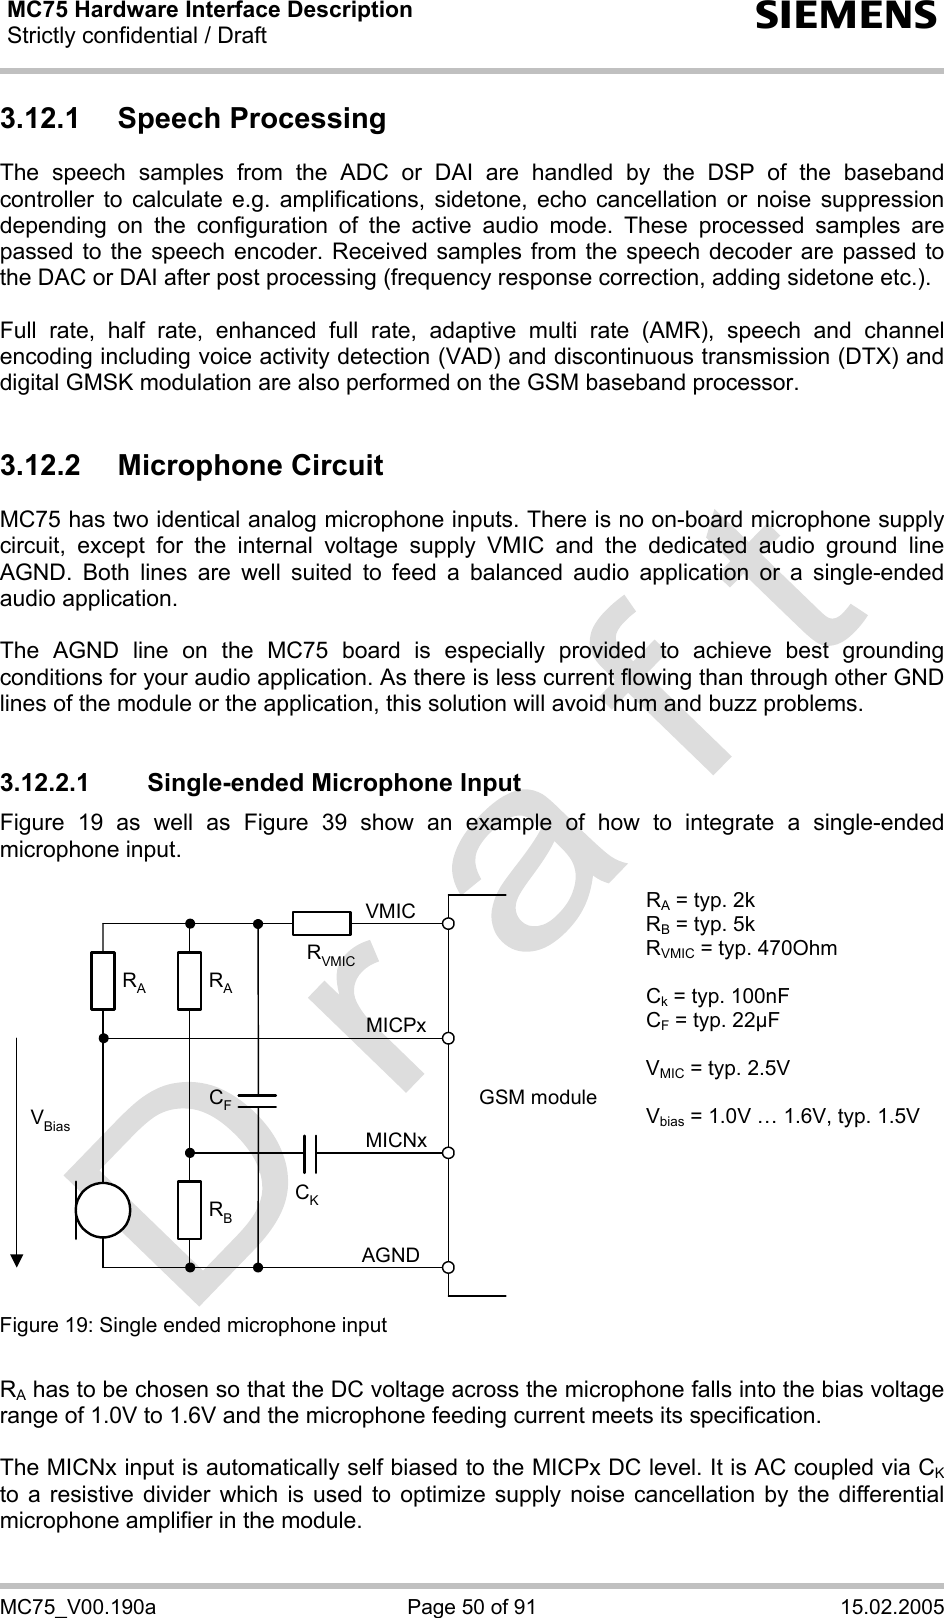 MC75 Hardware Interface Description Strictly confidential / Draft  s MC75_V00.190a  Page 50 of 91  15.02.2005 3.12.1 Speech Processing The speech samples from the ADC or DAI are handled by the DSP of the baseband controller to calculate e.g. amplifications, sidetone, echo cancellation or noise suppression depending on the configuration of the active audio mode. These processed samples are passed to the speech encoder. Received samples from the speech decoder are passed to the DAC or DAI after post processing (frequency response correction, adding sidetone etc.).  Full rate, half rate, enhanced full rate, adaptive multi rate (AMR), speech and channel encoding including voice activity detection (VAD) and discontinuous transmission (DTX) and digital GMSK modulation are also performed on the GSM baseband processor.  3.12.2 Microphone Circuit MC75 has two identical analog microphone inputs. There is no on-board microphone supply circuit, except for the internal voltage supply VMIC and the dedicated audio ground line AGND. Both lines are well suited to feed a balanced audio application or a single-ended audio application.   The AGND line on the MC75 board is especially provided to achieve best grounding conditions for your audio application. As there is less current flowing than through other GND lines of the module or the application, this solution will avoid hum and buzz problems.   3.12.2.1 Single-ended Microphone Input Figure 19 as well as Figure 39 show an example of how to integrate a single-ended microphone input.   GSM moduleRBVBiasCKAGNDMICNxMICPxVMICRARACFRVMICRA = typ. 2k RB = typ. 5k RVMIC = typ. 470Ohm  Ck = typ. 100nF CF = typ. 22µF  VMIC = typ. 2.5V  Vbias = 1.0V … 1.6V, typ. 1.5V Figure 19: Single ended microphone input    RA has to be chosen so that the DC voltage across the microphone falls into the bias voltage range of 1.0V to 1.6V and the microphone feeding current meets its specification.  The MICNx input is automatically self biased to the MICPx DC level. It is AC coupled via CK to a resistive divider which is used to optimize supply noise cancellation by the differential microphone amplifier in the module.   